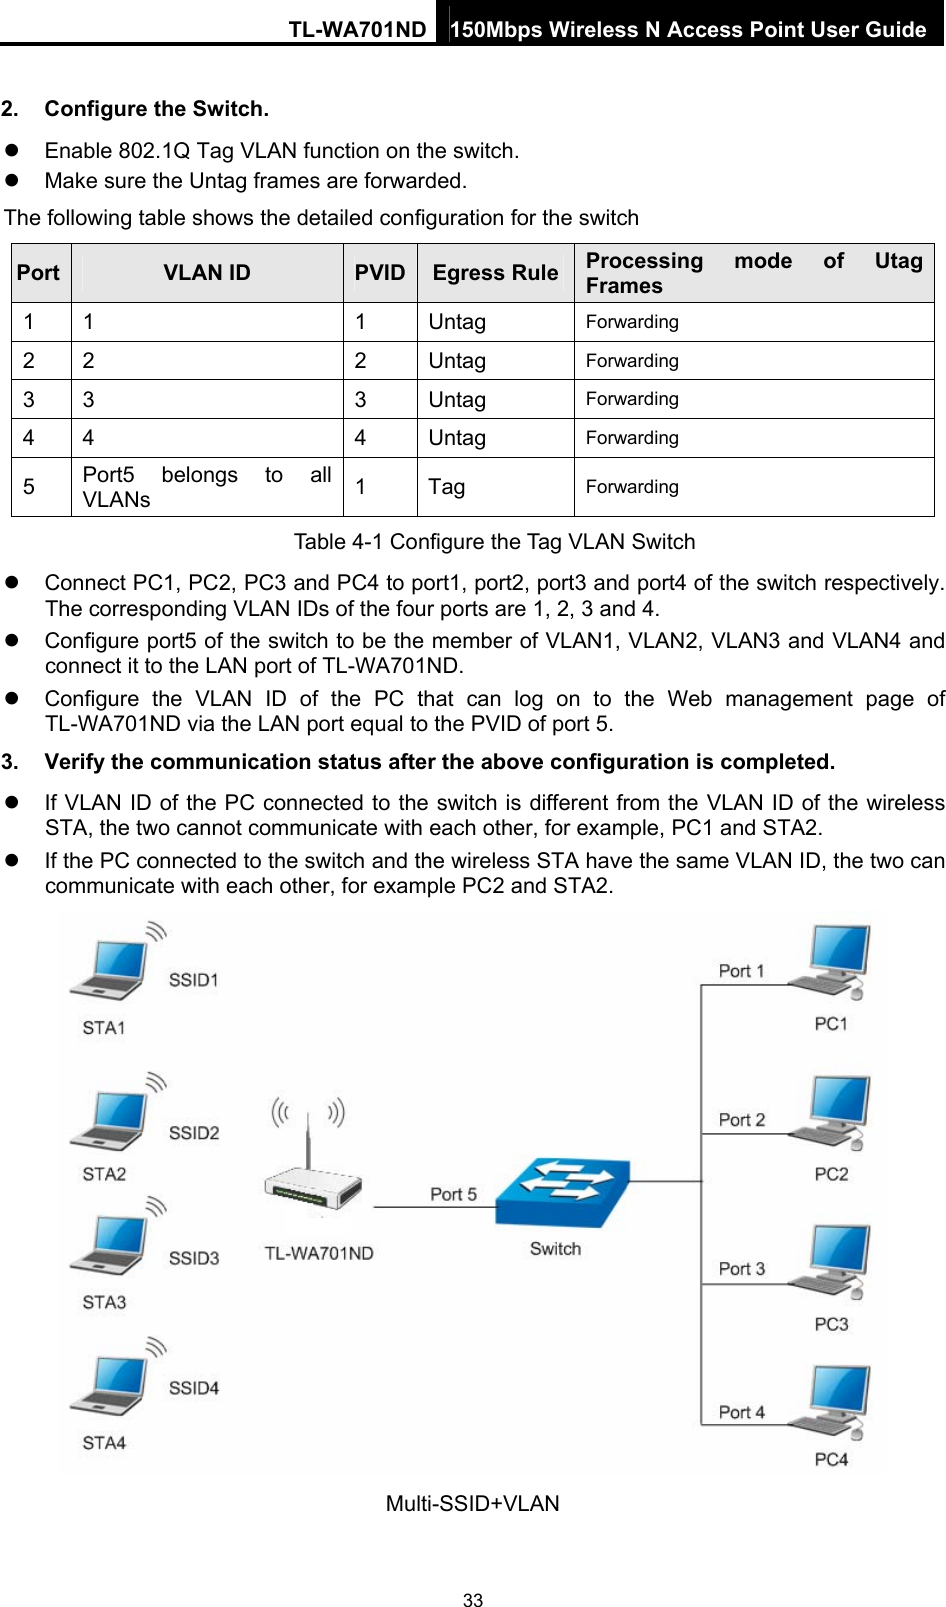 TL-WA701ND 150Mbps Wireless N Access Point User Guide 2.  Configure the Switch. z  Enable 802.1Q Tag VLAN function on the switch. z  Make sure the Untag frames are forwarded. The following table shows the detailed configuration for the switch   Port  VLAN ID  PVID Egress Rule Processing mode of Utag Frames 1 1  1  Untag  Forwarding 2 2  2  Untag  Forwarding 3 3  3  Untag  Forwarding  4 4  4  Untag  Forwarding 5  Port5 belongs to all VLANs  1 Tag  Forwarding Table 4-1 Configure the Tag VLAN Switch z  Connect PC1, PC2, PC3 and PC4 to port1, port2, port3 and port4 of the switch respectively. The corresponding VLAN IDs of the four ports are 1, 2, 3 and 4. z  Configure port5 of the switch to be the member of VLAN1, VLAN2, VLAN3 and VLAN4 and connect it to the LAN port of TL-WA701ND. z  Configure the VLAN ID of the PC that can log on to the Web management page of TL-WA701ND via the LAN port equal to the PVID of port 5. 3.  Verify the communication status after the above configuration is completed. z  If VLAN ID of the PC connected to the switch is different from the VLAN ID of the wireless STA, the two cannot communicate with each other, for example, PC1 and STA2. z  If the PC connected to the switch and the wireless STA have the same VLAN ID, the two can communicate with each other, for example PC2 and STA2.  Multi-SSID+VLAN 33 